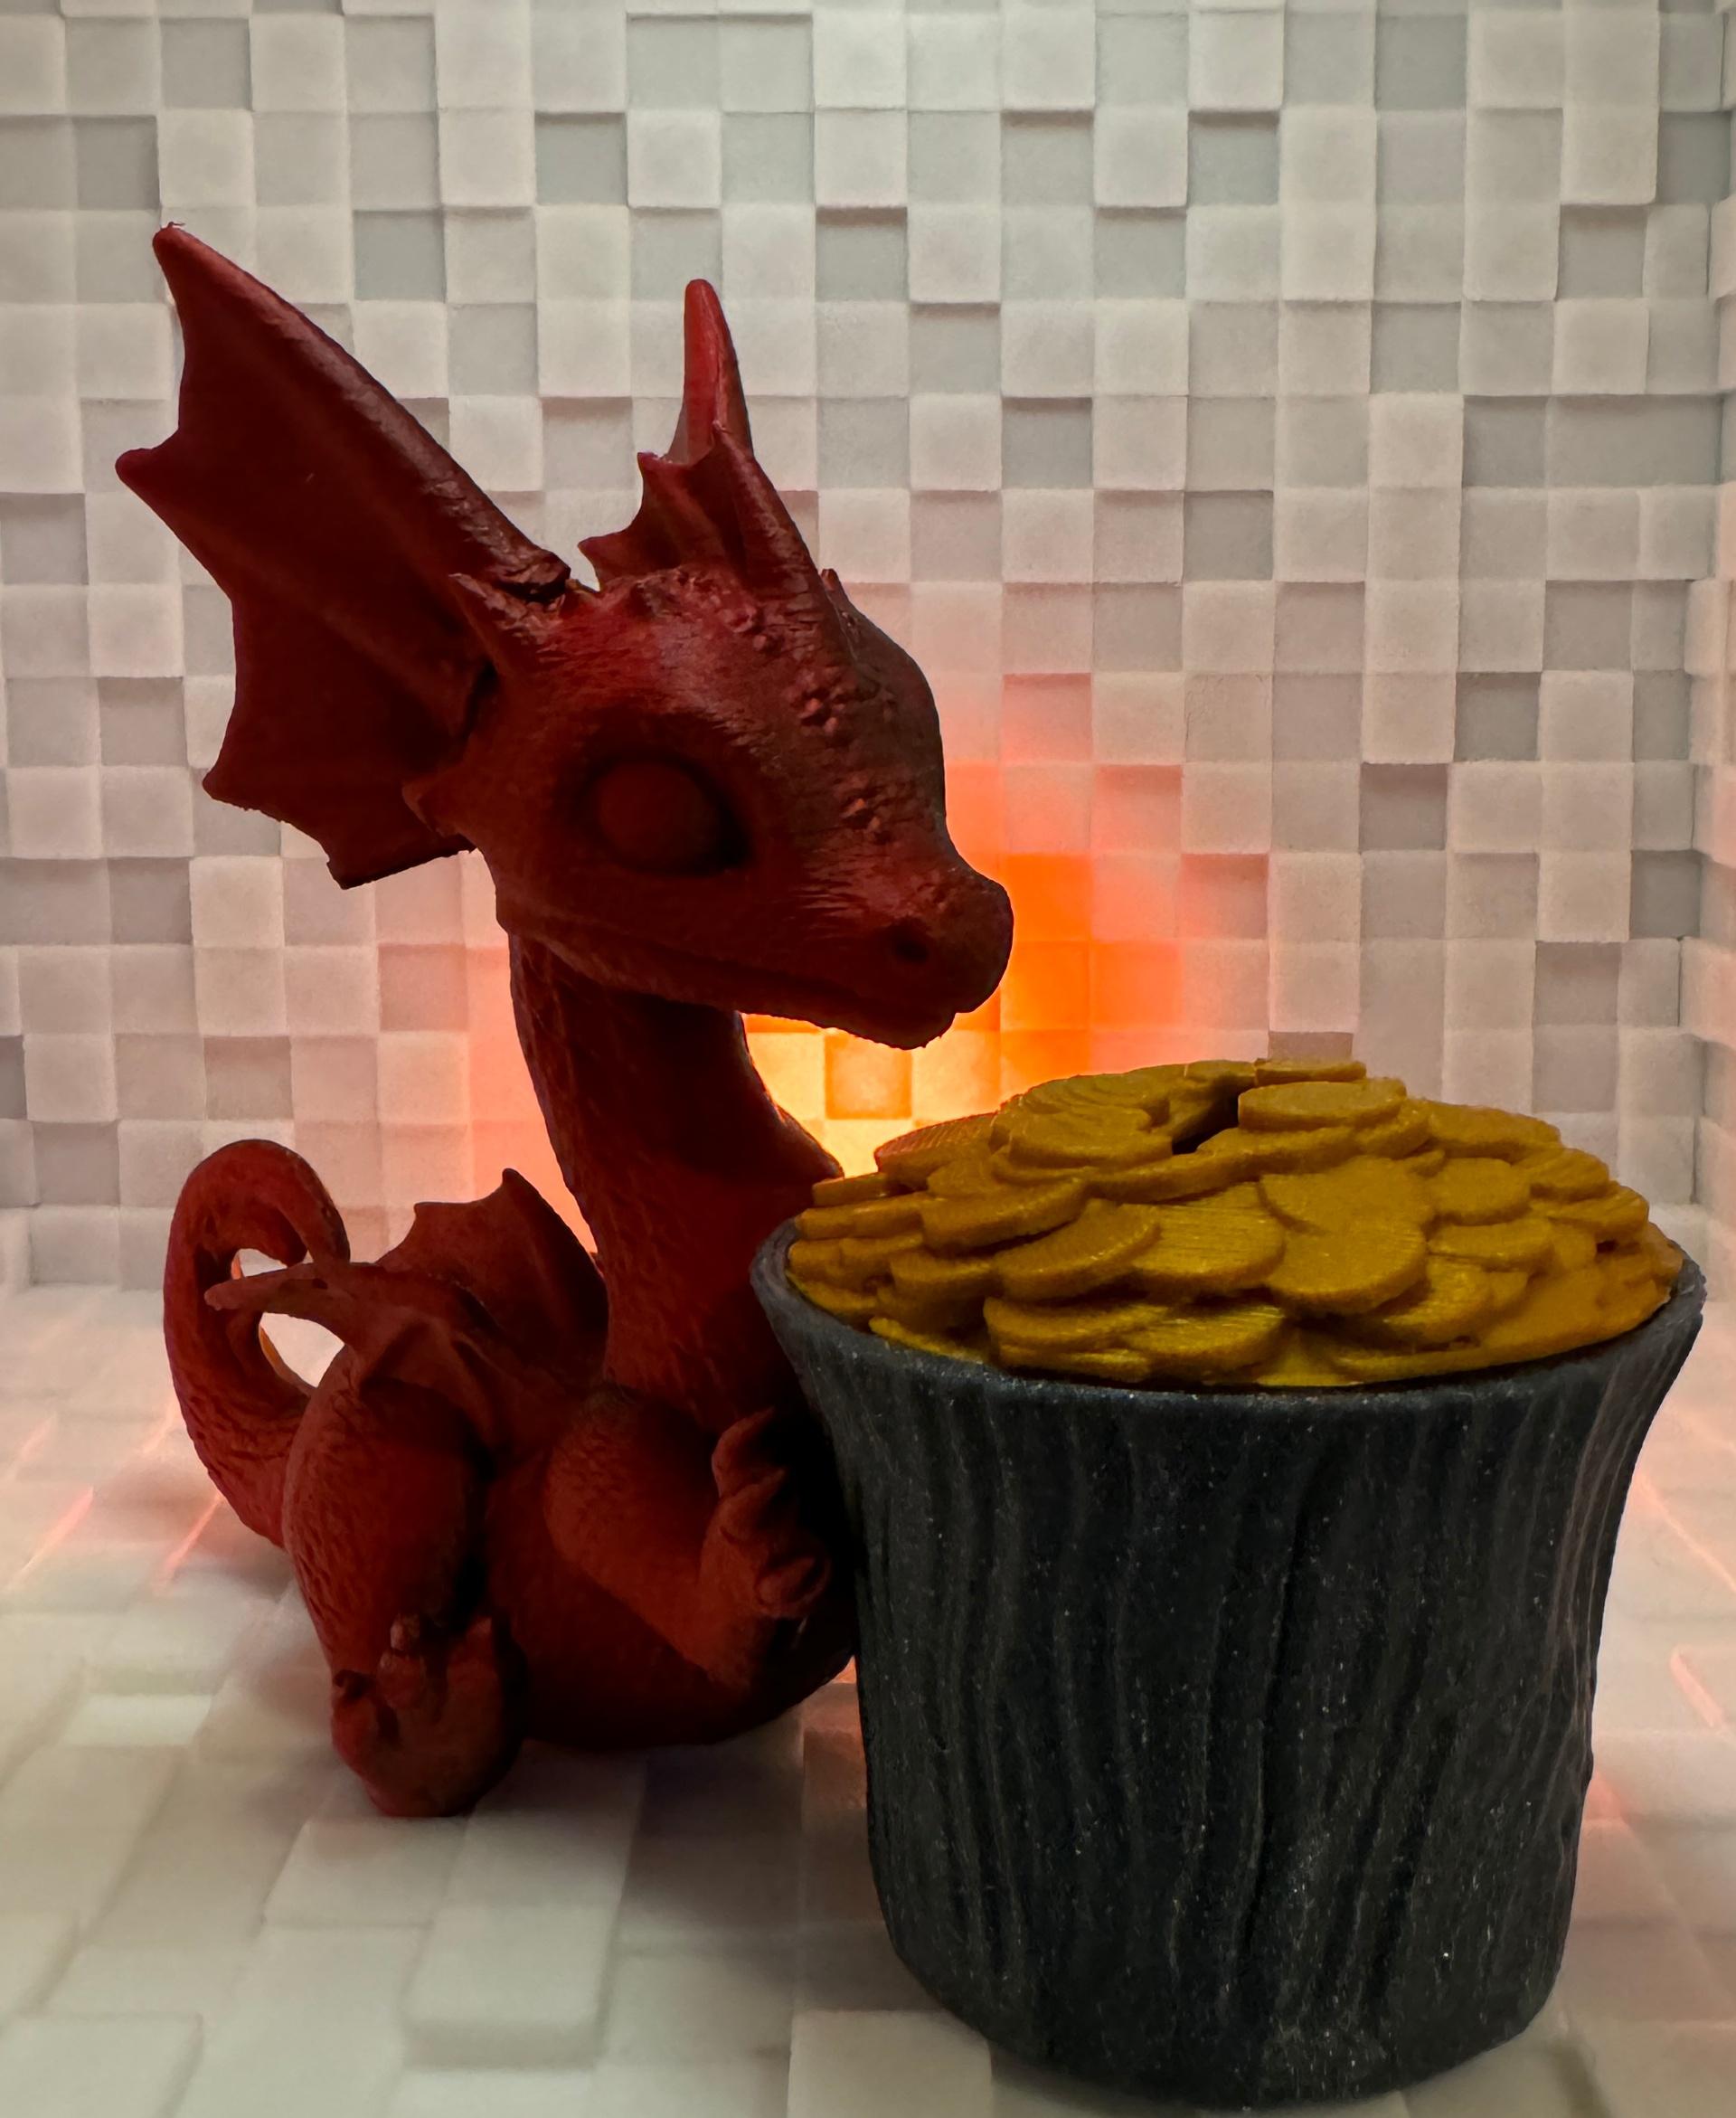 Dragon - Toy Pot Planter - Every dragon has a hoard of gold, even this little guy.

Printed him in Polymaker Polyterra Shadow Red PLA, the pot in Hatchbox Sparkle Gray PLA, and the coins (remixed from Chelsey's Pot o' Gold model) in PolyLite Gold PLA. - 3d model